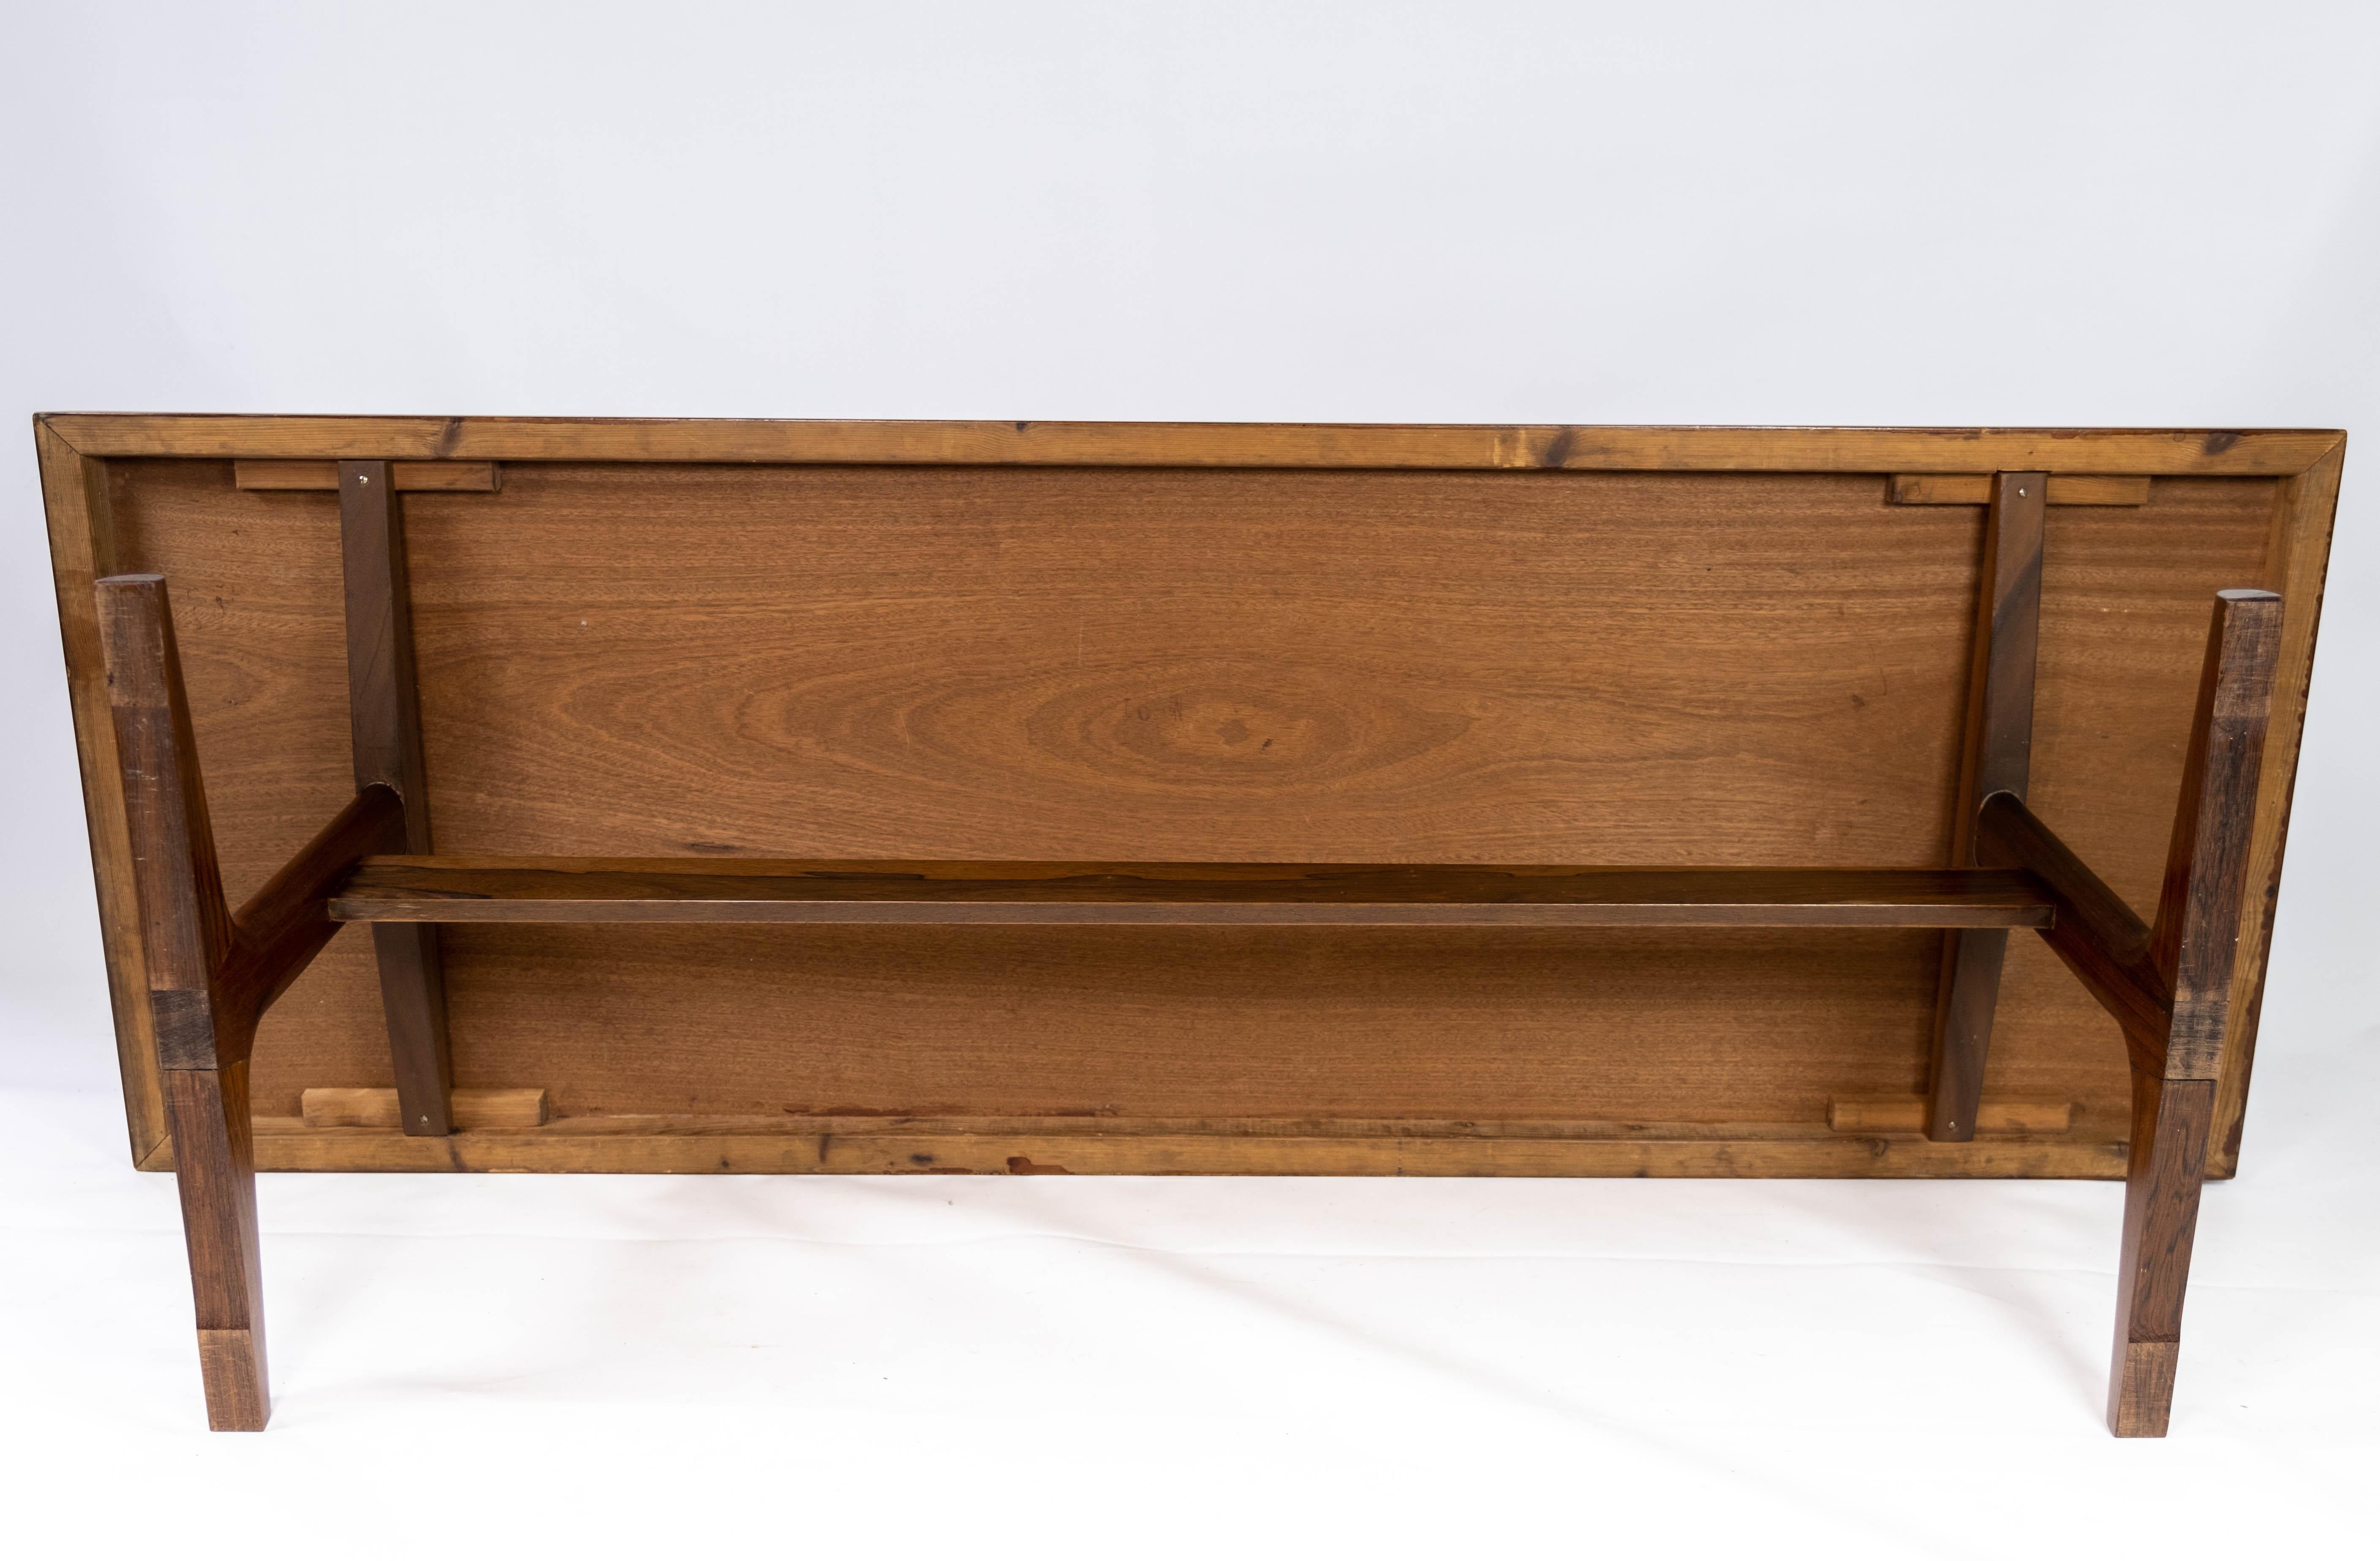 Coffee Table Made In Rosewood With Shaker Legs, Danish Design From 1960s For Sale 4